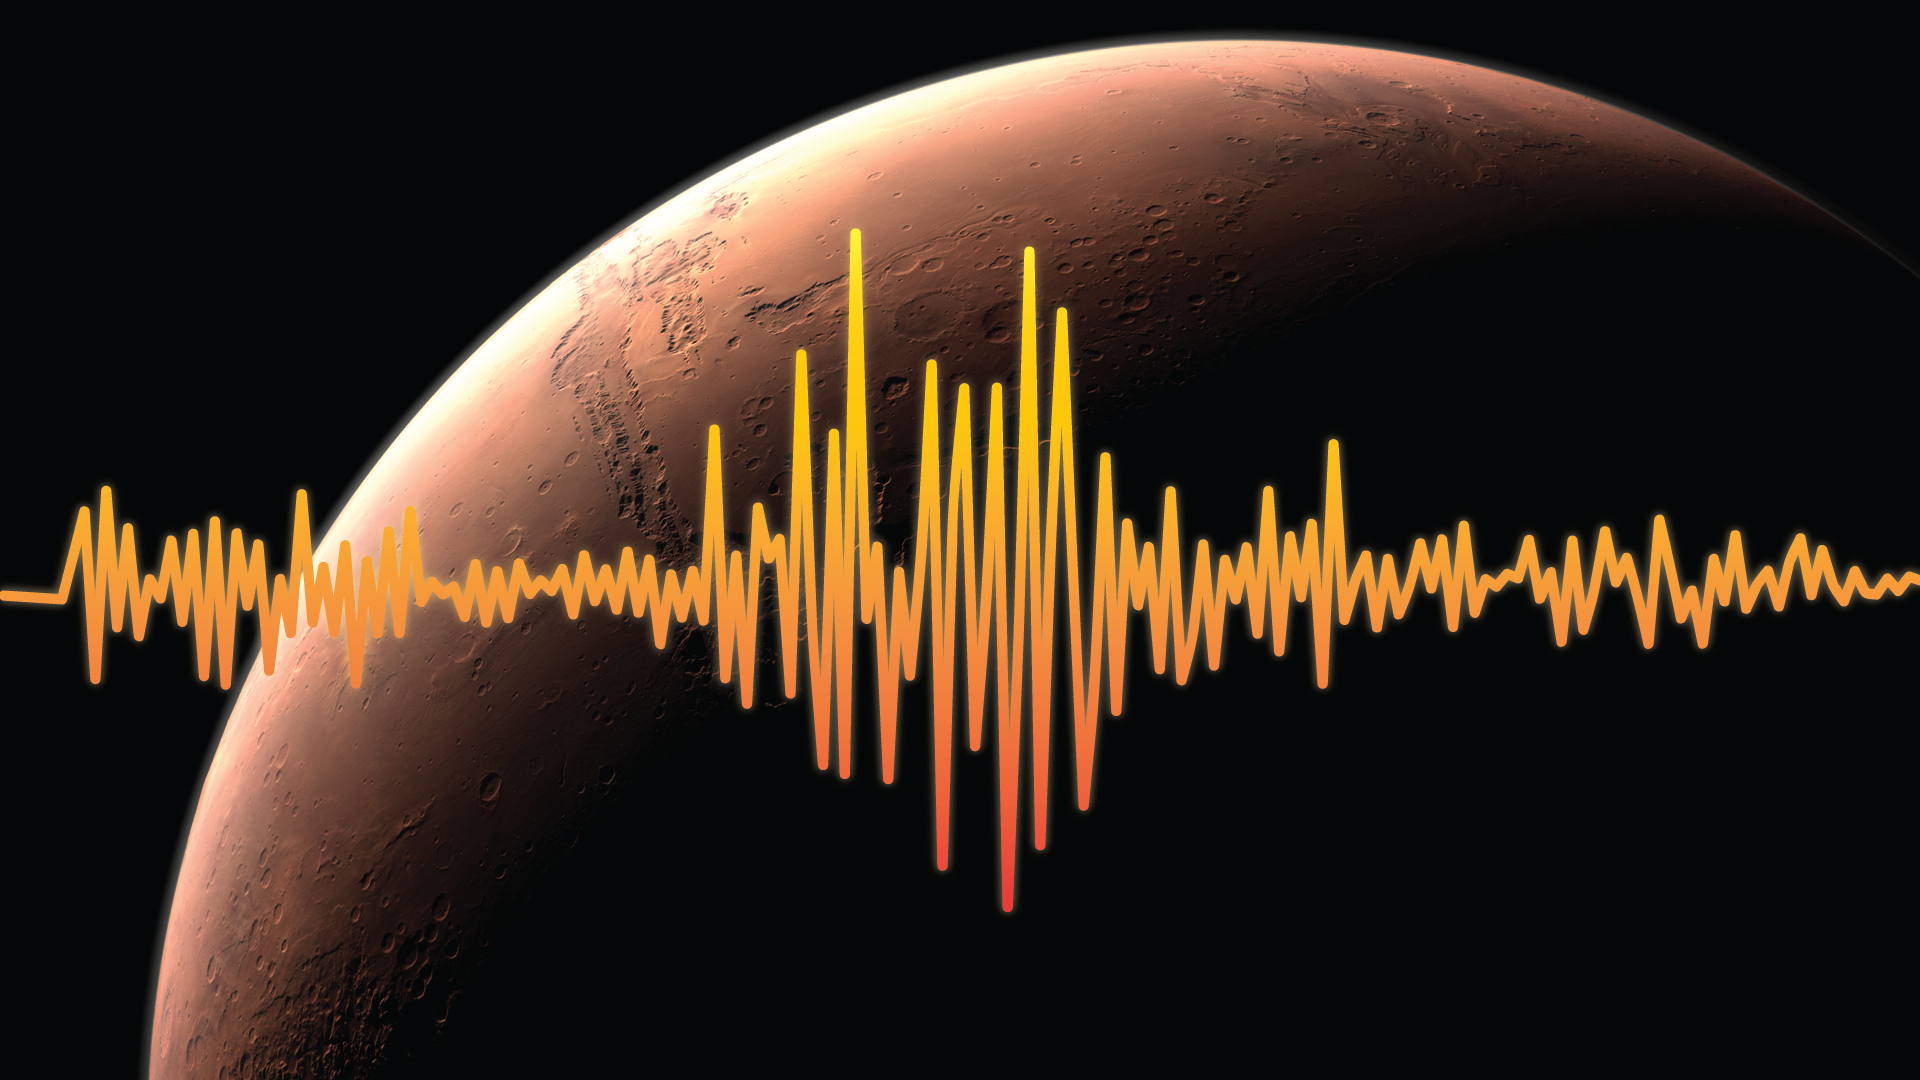 Seismograph waves are superimposed over an illustration of Mars.